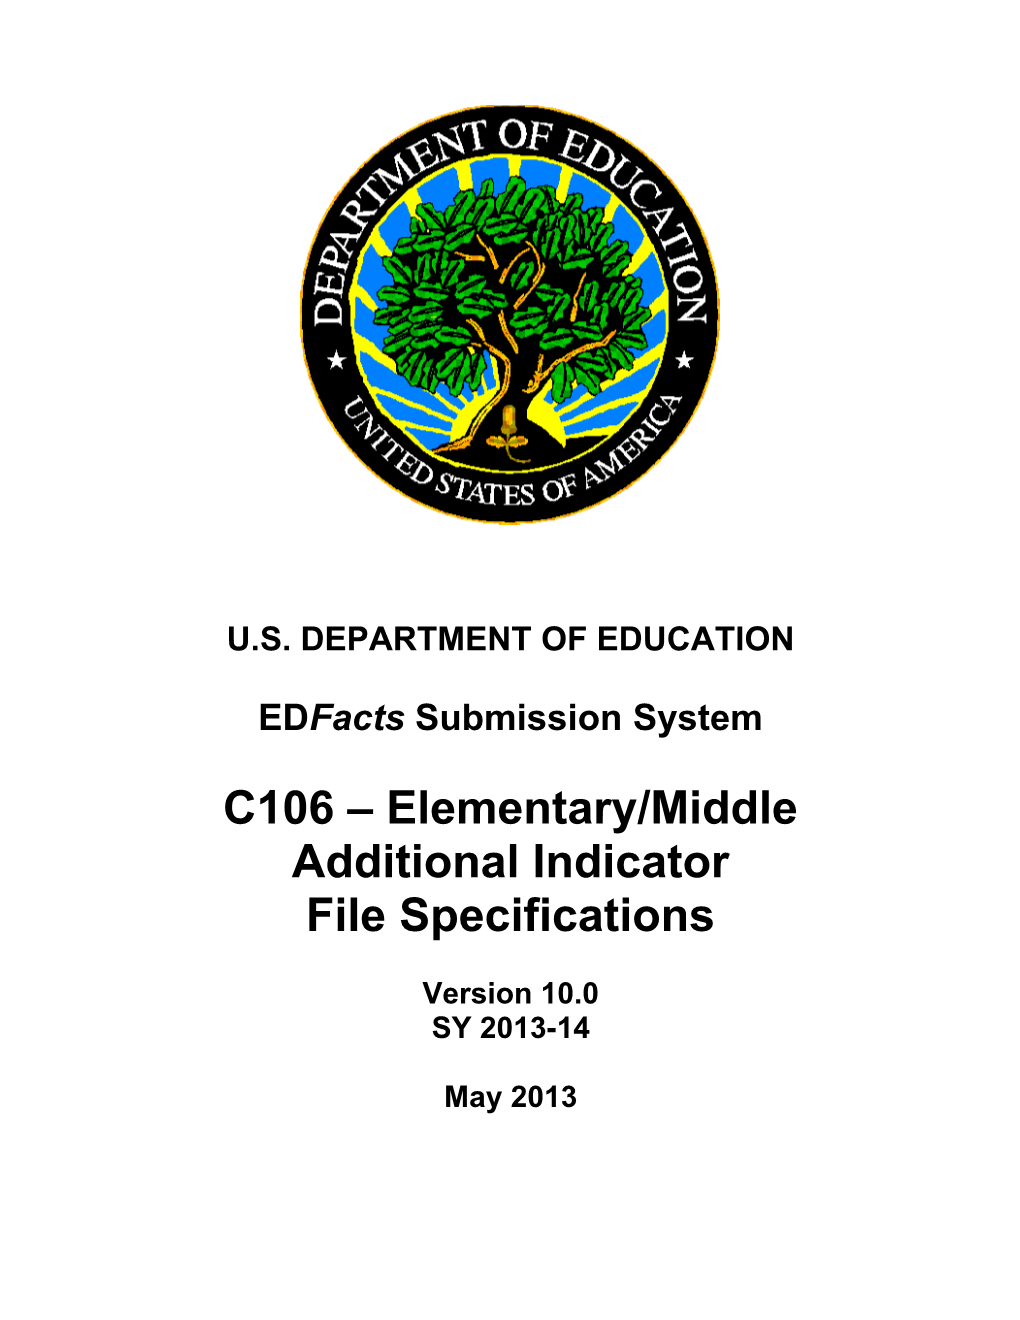 Elementary/Middle Additional Indicator File Specifications